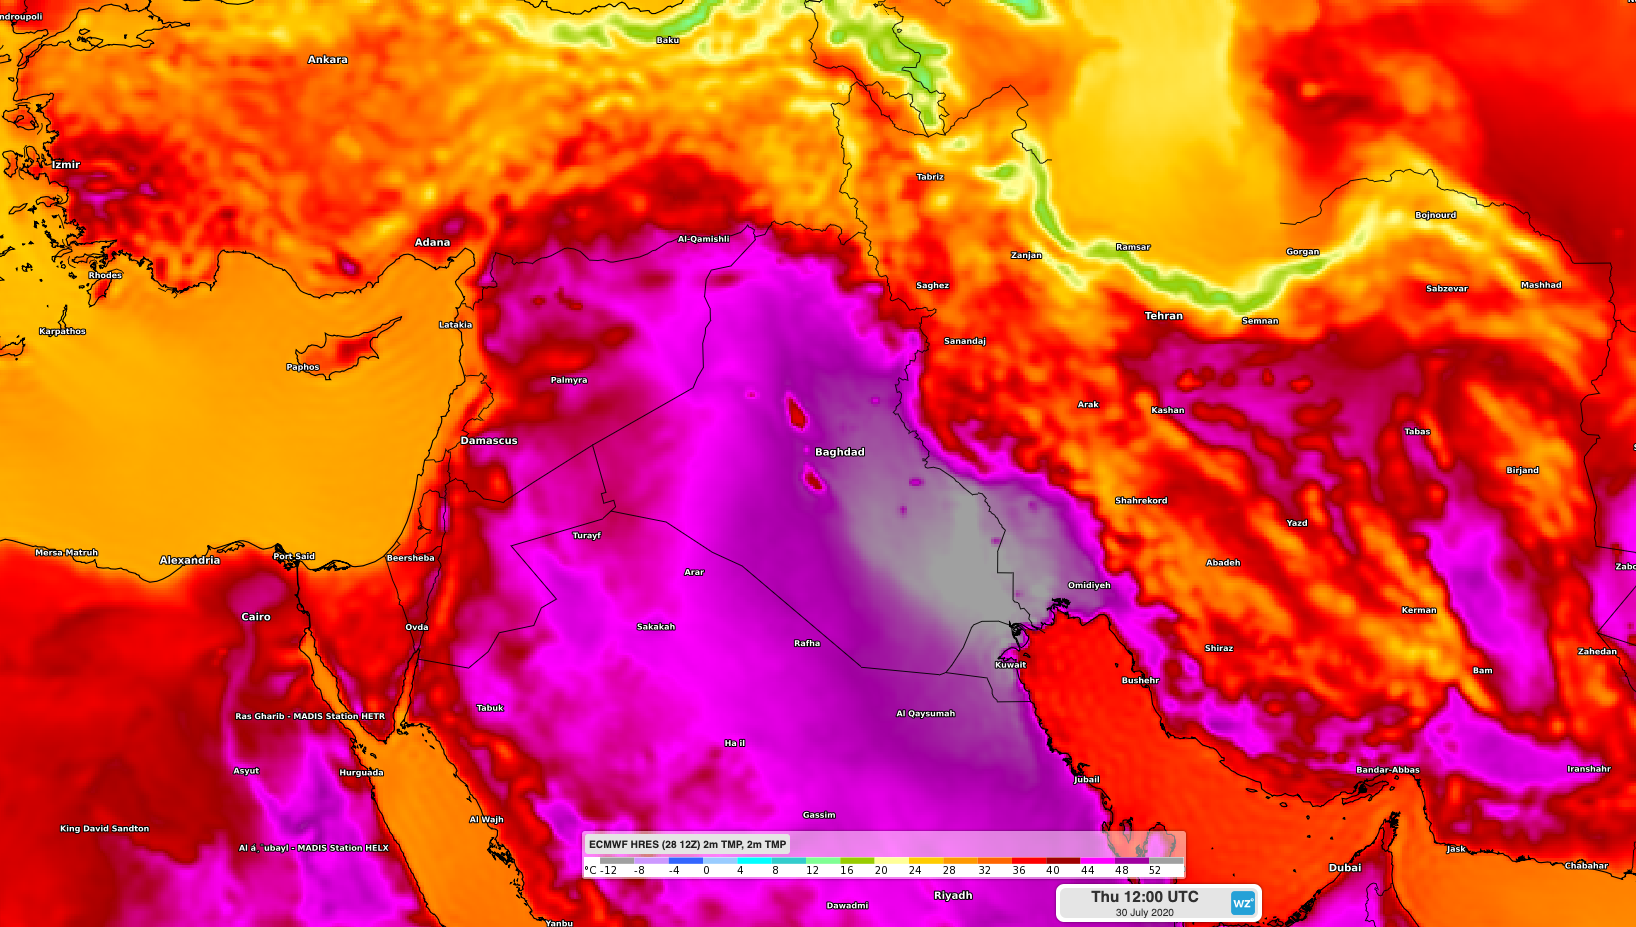 Records falling as temperatures exceed 50 degrees in Iraq